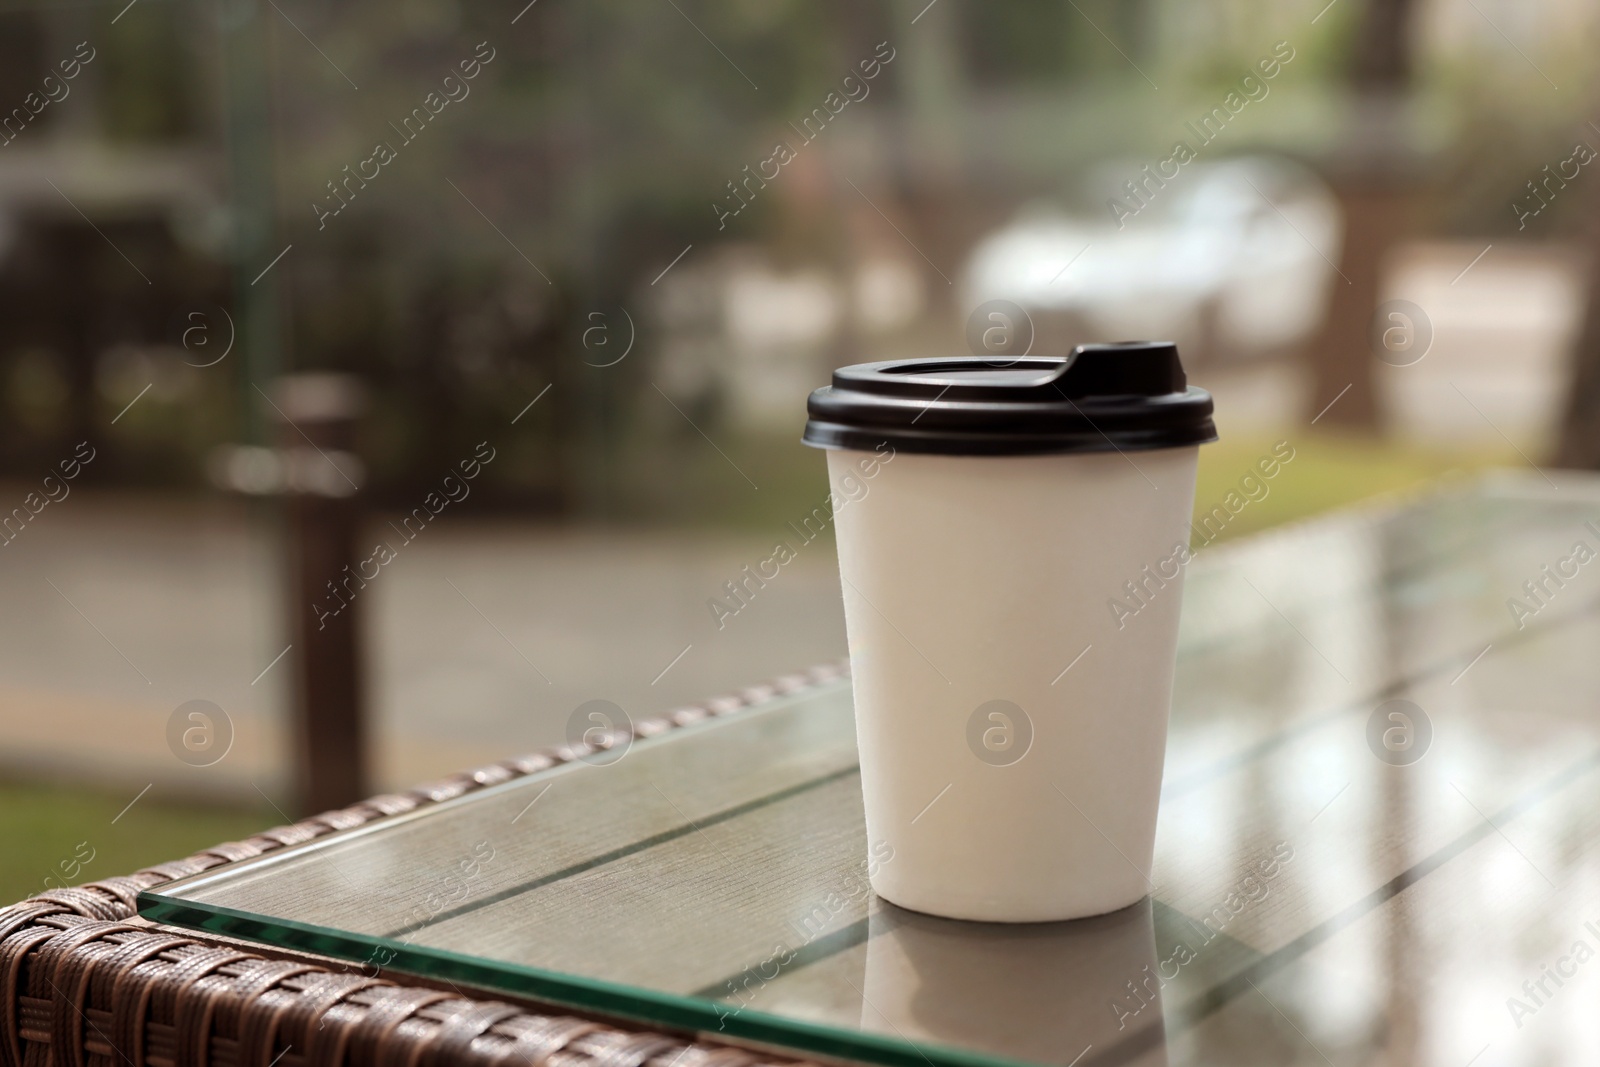 Photo of Paper takeaway cup on glass table outdoors. Coffee to go